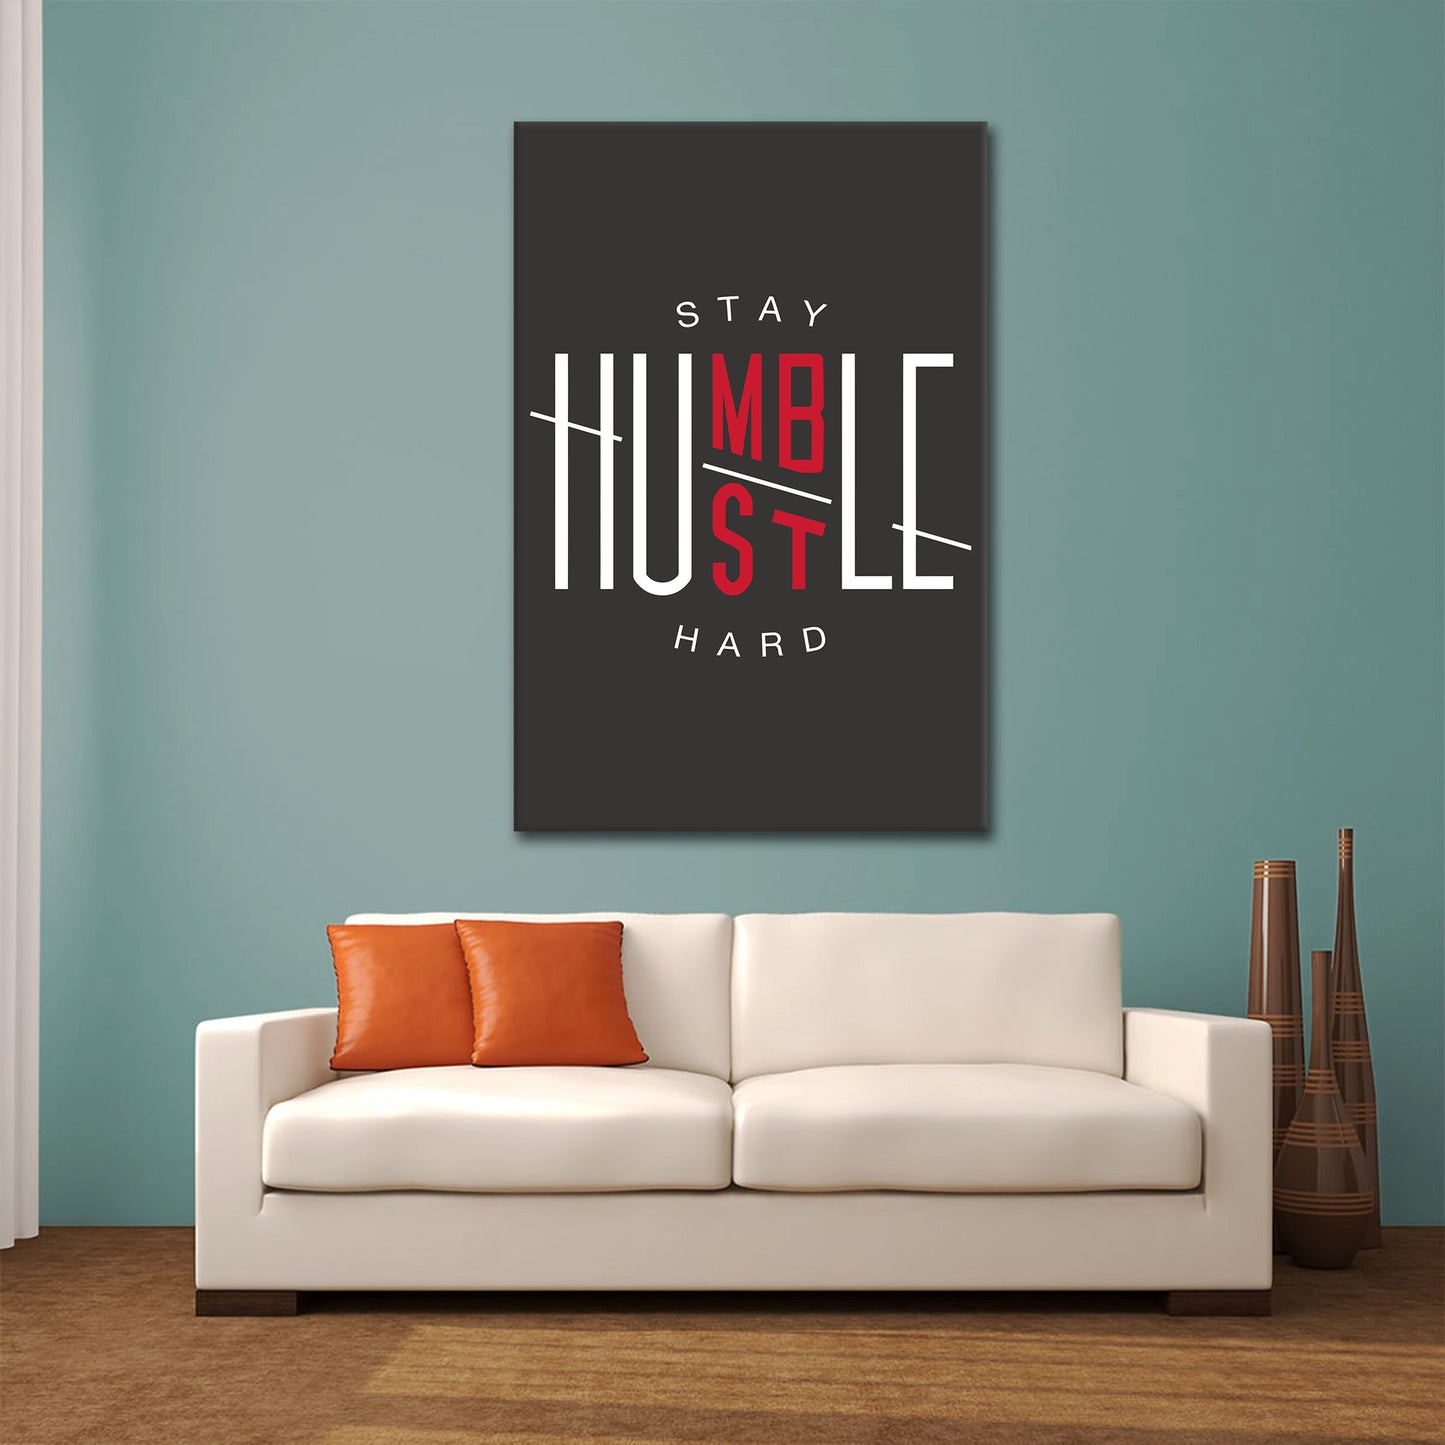 Stay Humble - Hustle Hard - Vented Canvas